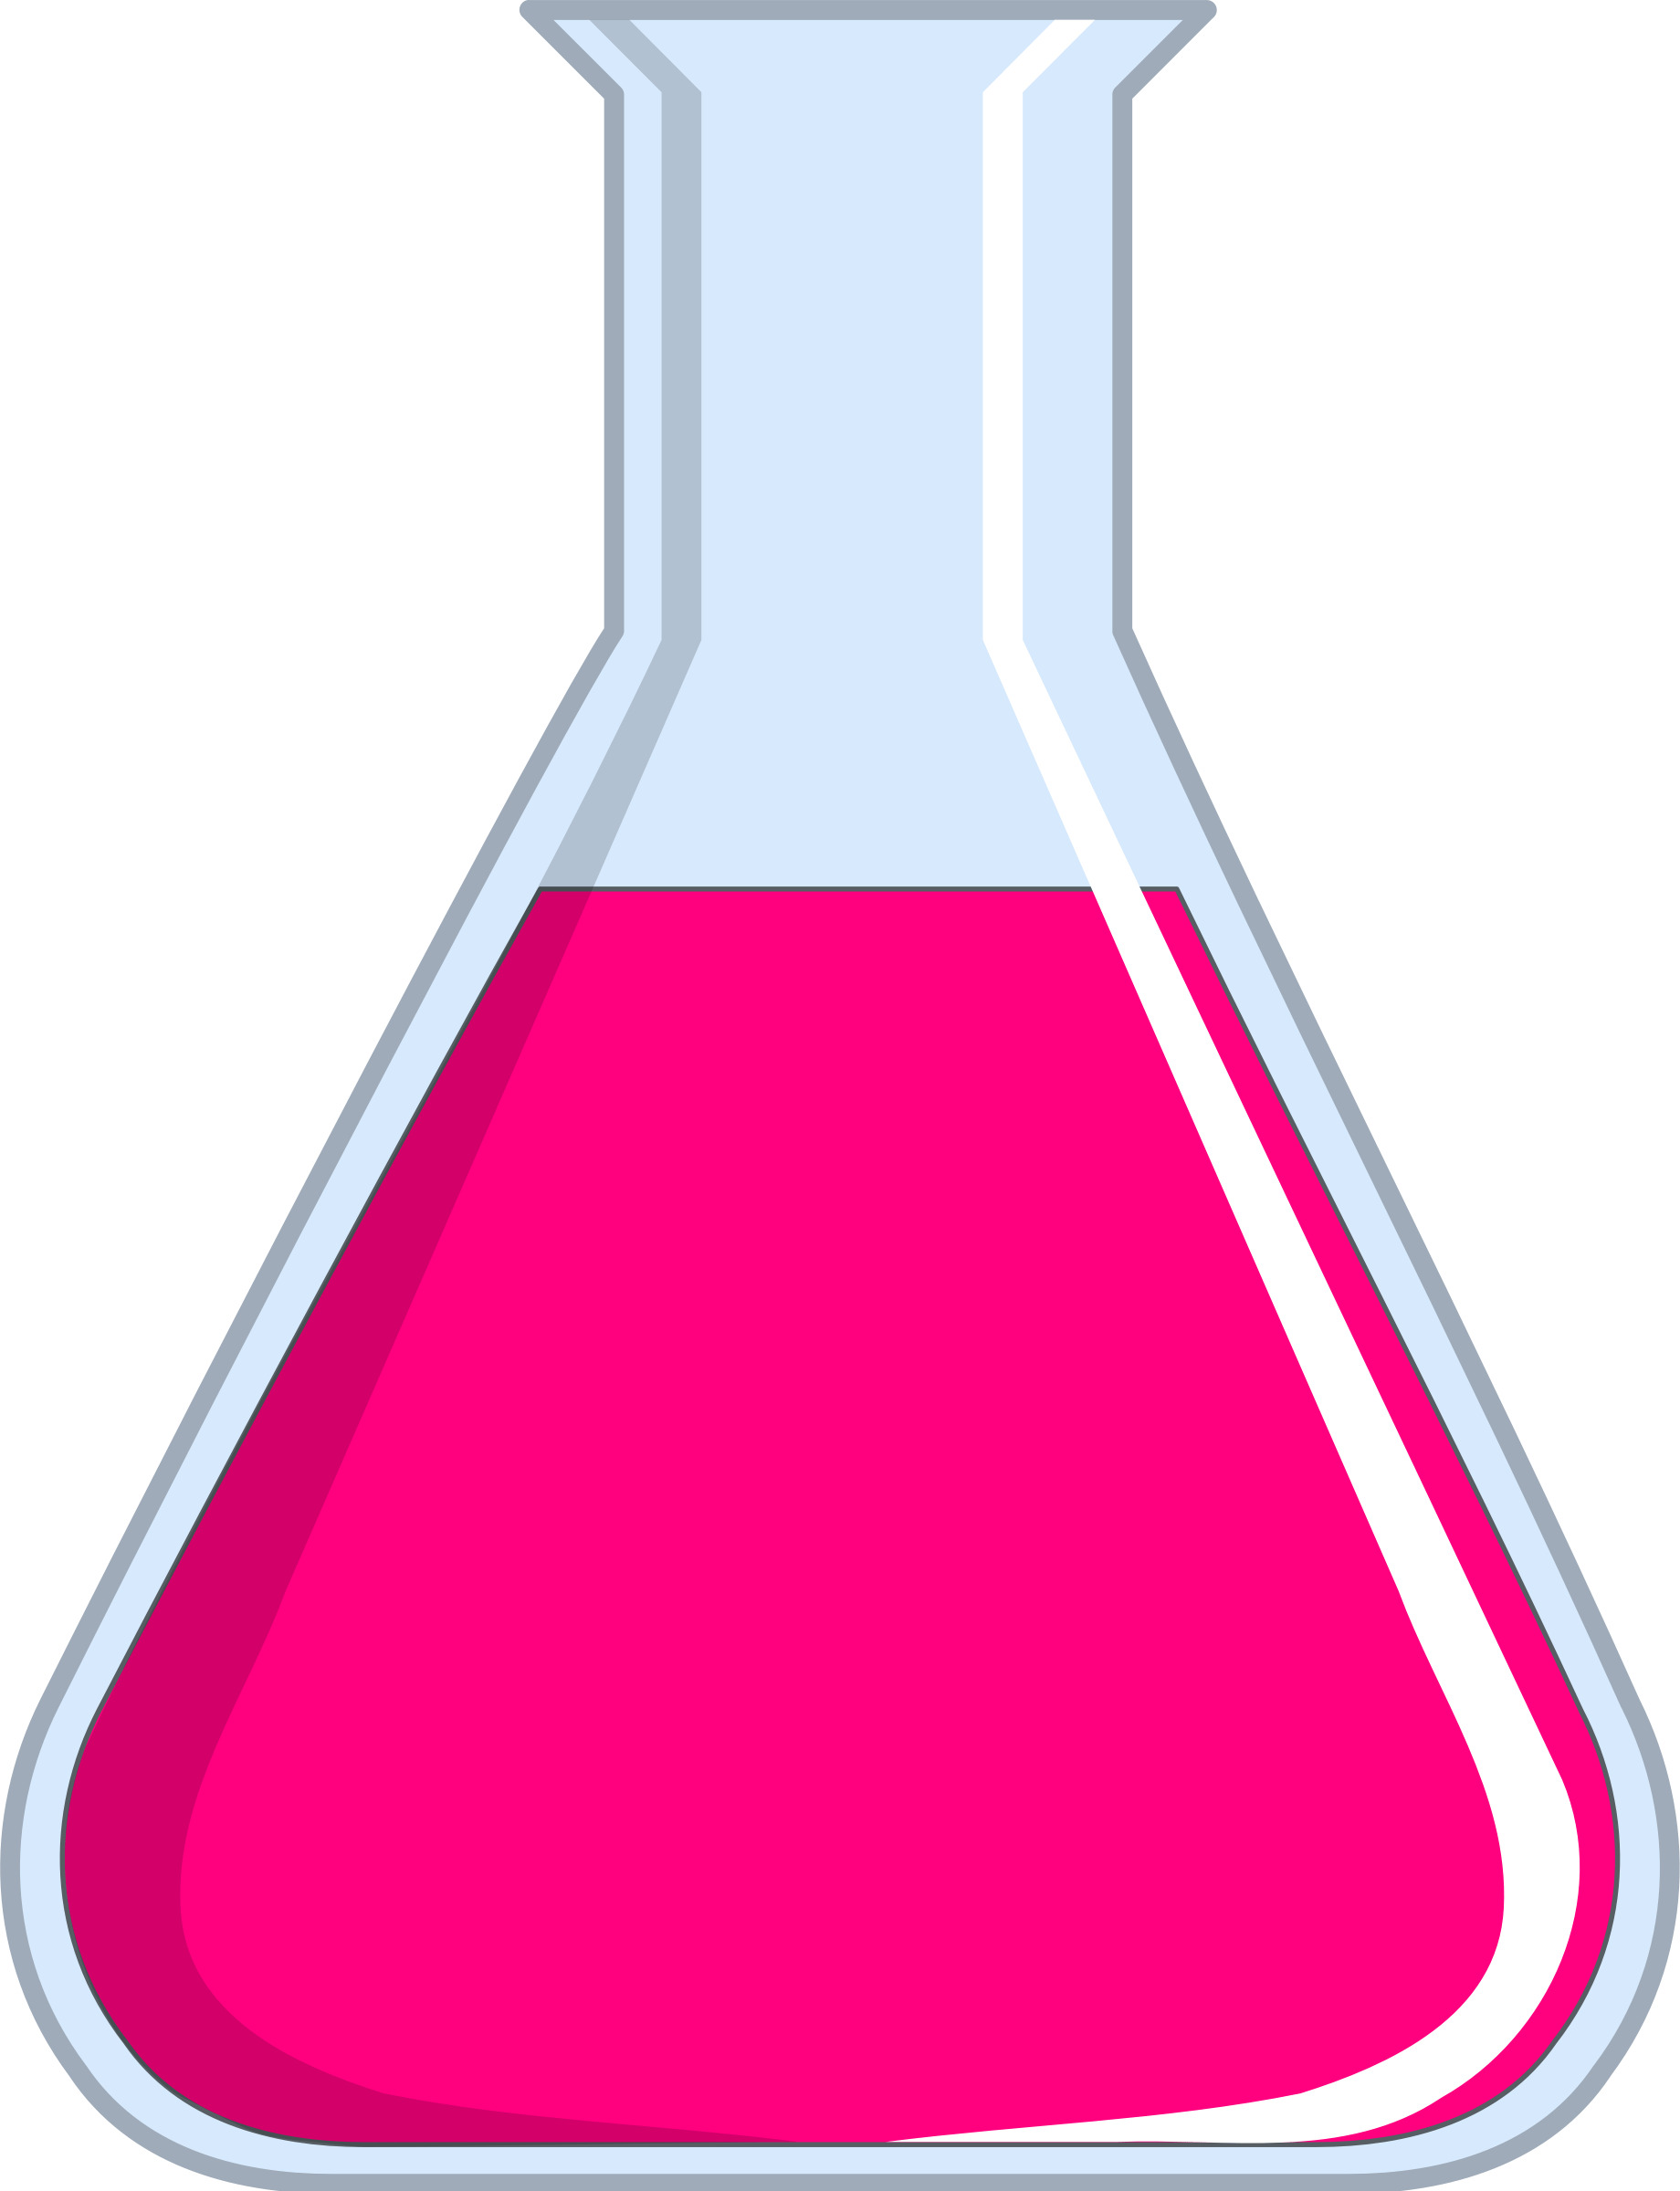 Test Tube Containing Pink Liquid icons